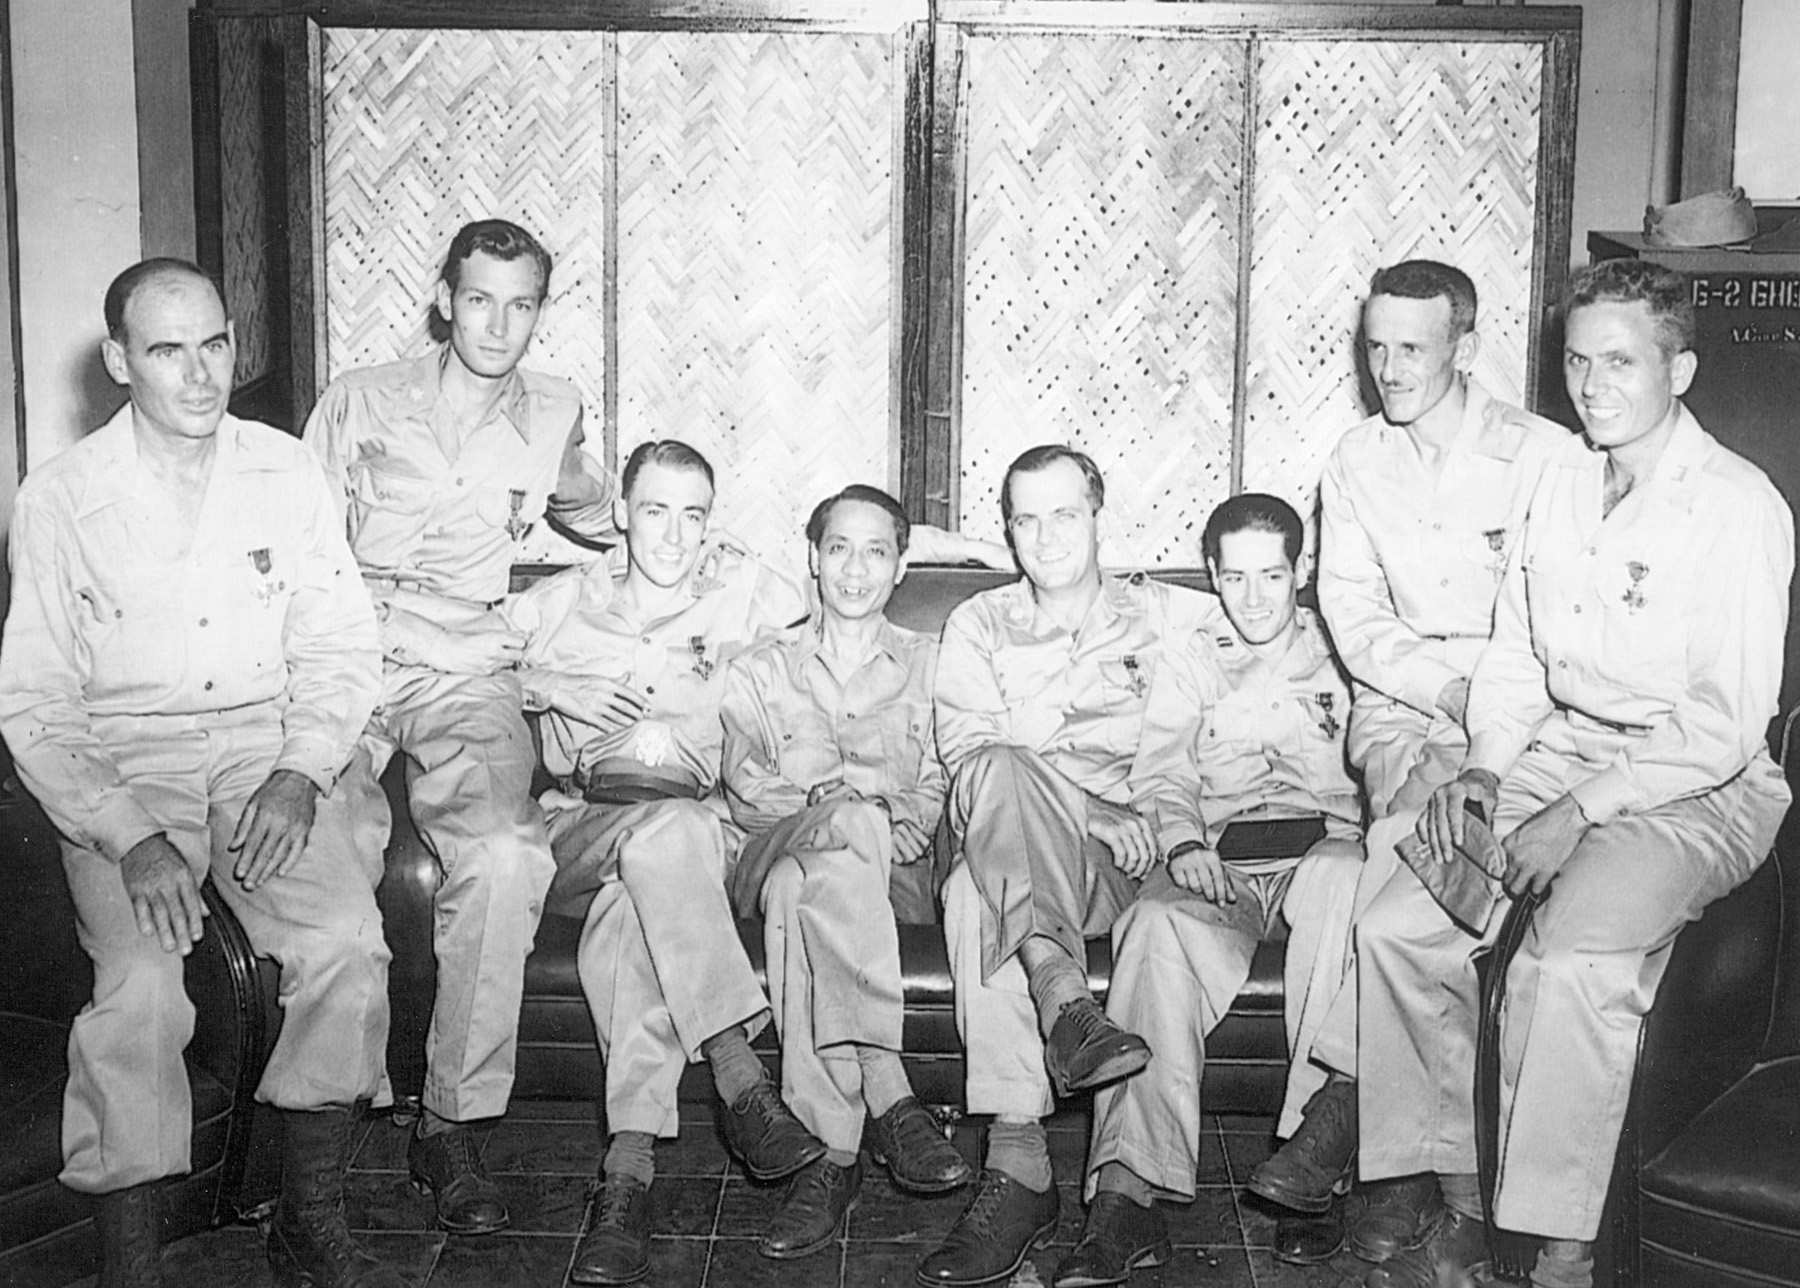 Seven American guerrilla leaders in the Philippines were presented the Distinguished Service Medal by General Douglas MacArthur. Shown from left are Major Maury McKenzie, Major Robert B.  Lapham, Major Edwin P. Ramsey, General Manuel A. Roxas, Lieutenant Colonel Bernard L. Anderson, Captain Ray C. Hunt, Major John Boone, and Captain Alvin J. Farretta.